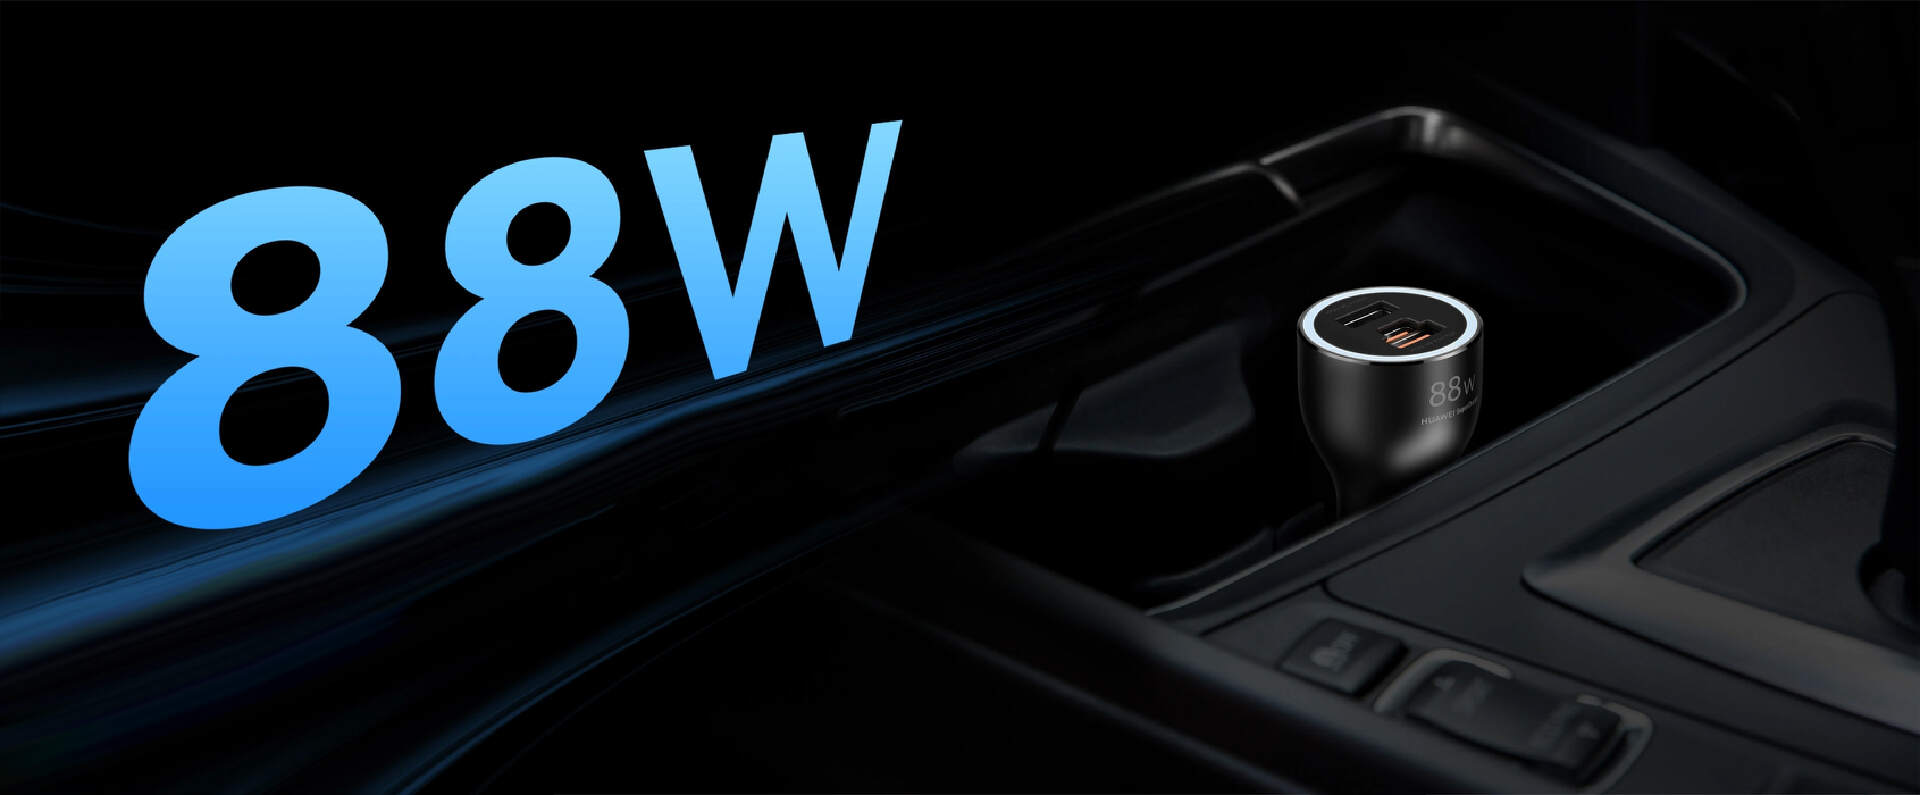 UFCS Protocol | Huawei Launched 88W 3-in-1 Car Charger-Chargerlab